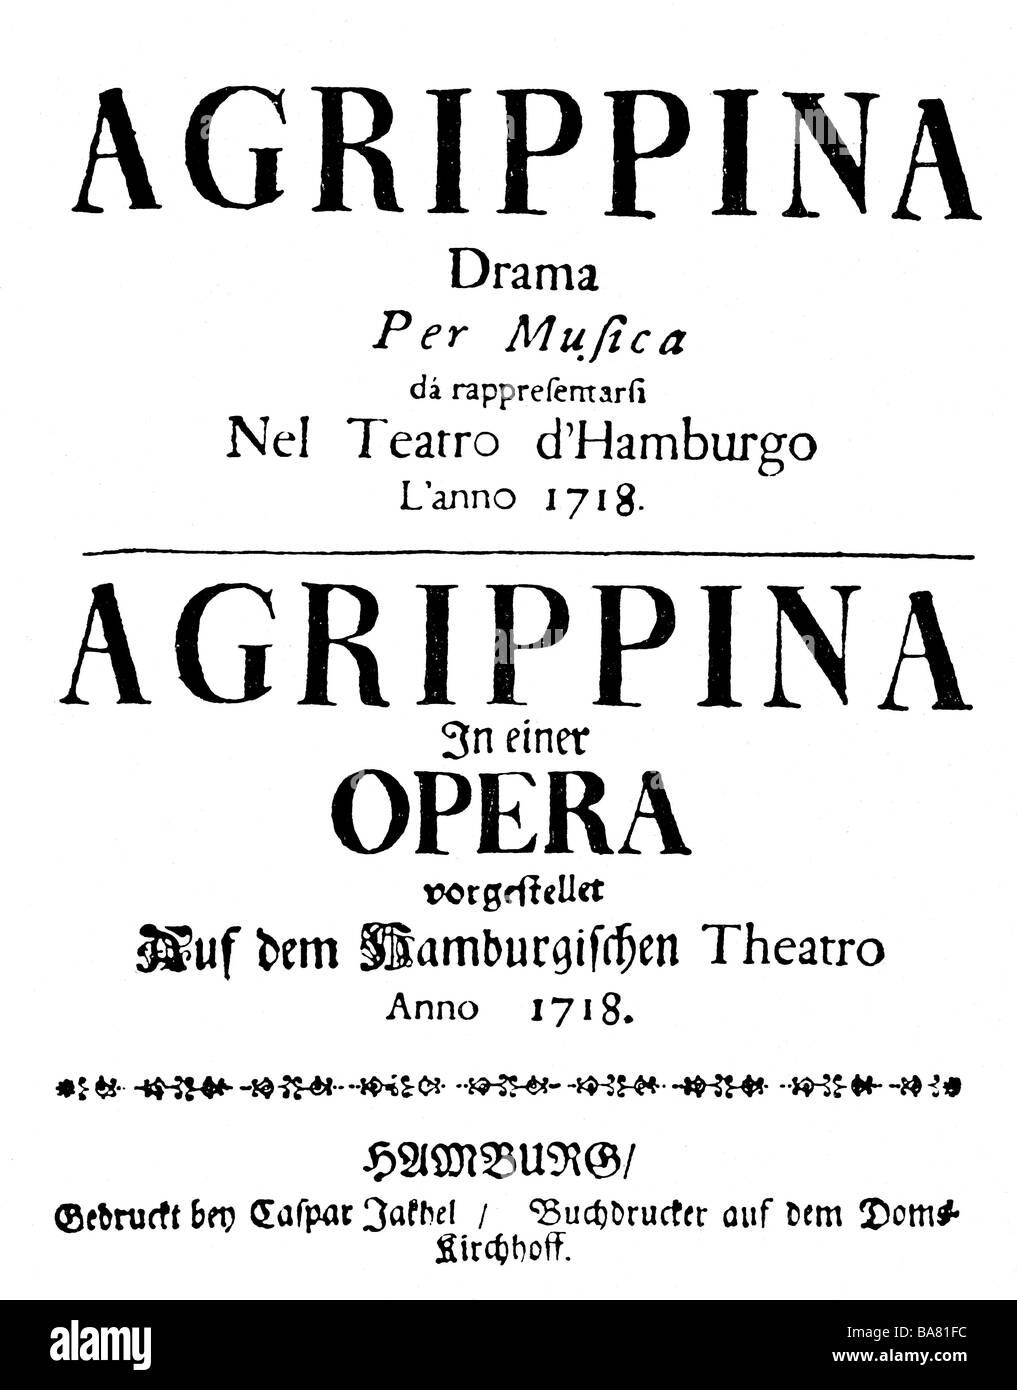 Handel, George Frederic, 23.2.1685 - 14.4.1759, compositeur allemand, œuvres, opéra 'Agrippina' (1709), performance, annonce, Hambourg, 1718, , Banque D'Images